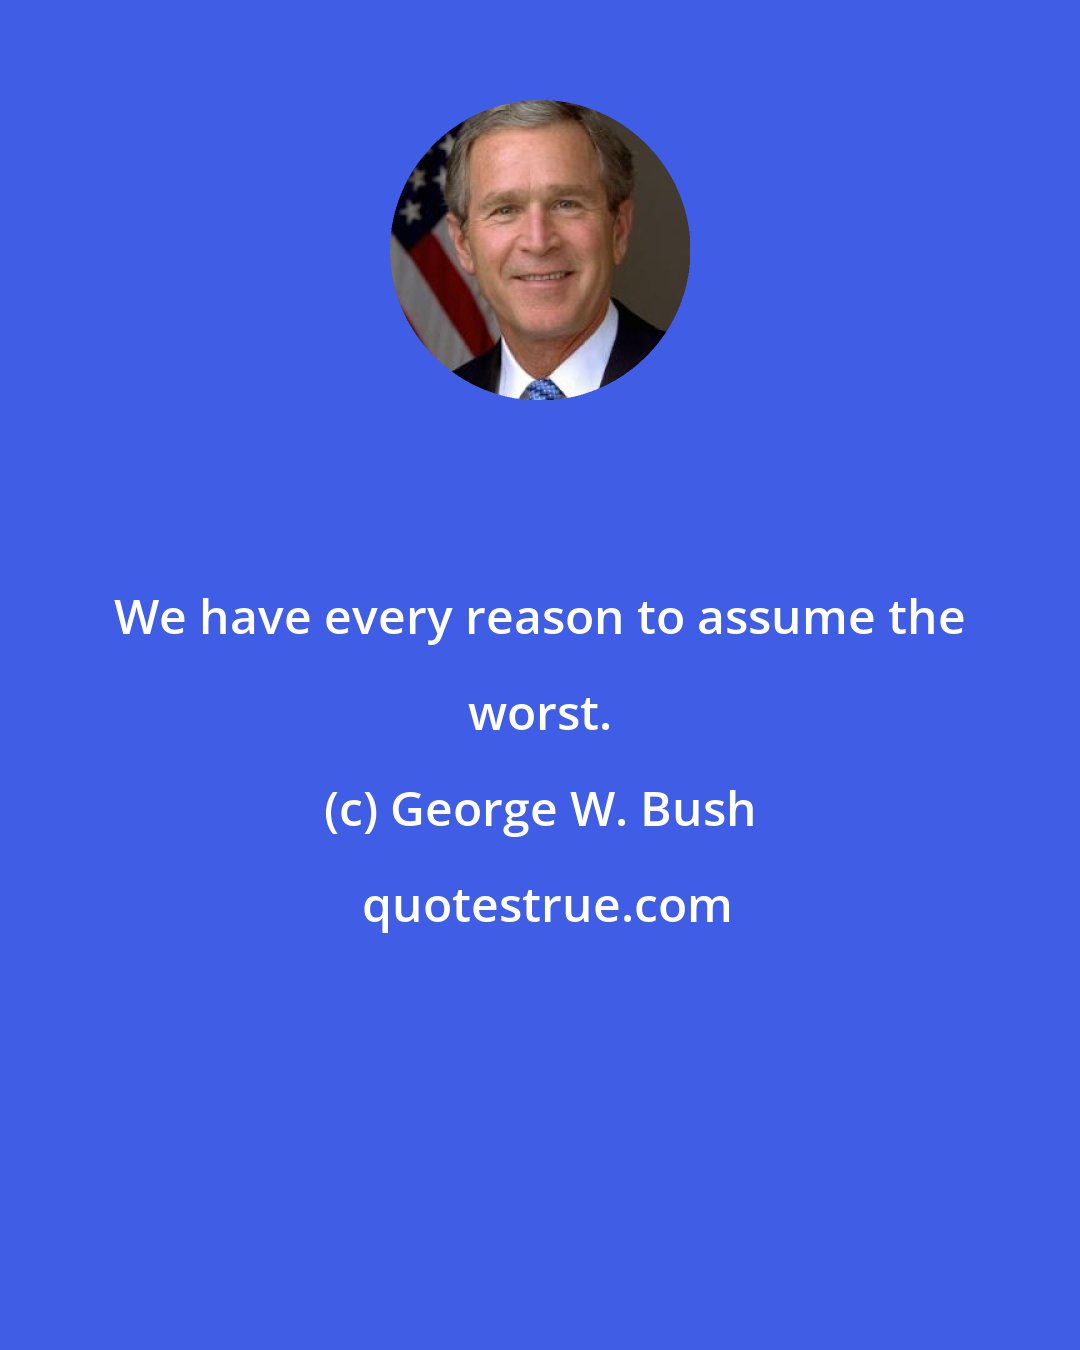 George W. Bush: We have every reason to assume the worst.